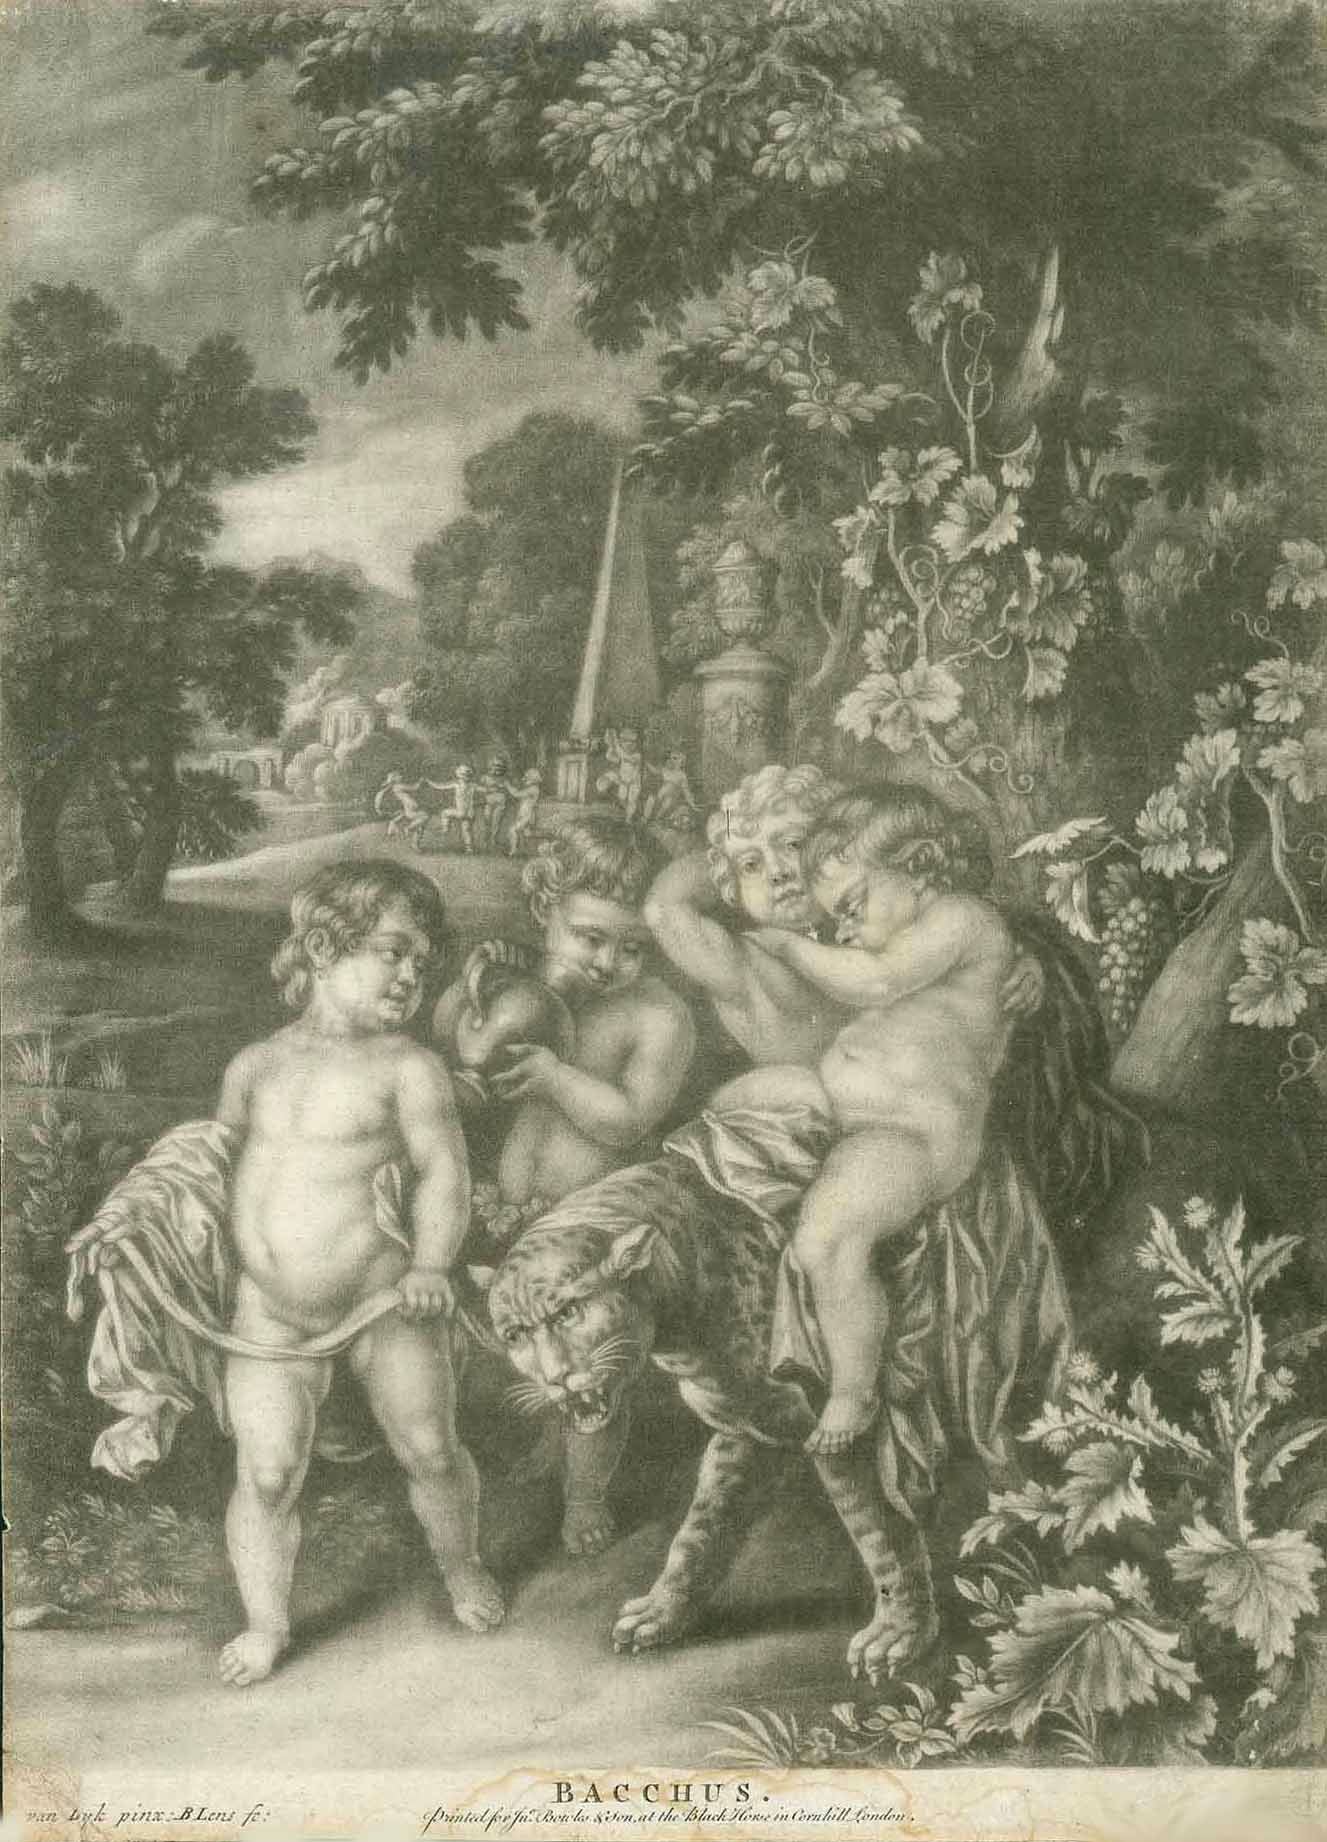 "Bacchus"  Mezzotint by Bernard Lens II (1659-1725)  After the painting by Anthony van Dyck  London, ca. 1690  Bacchus, as a child, riding insecurely on a leopard. He is accompanied by three companions, one guiding the leopard by least, one holding a jug of wine and the third supporting Bacchus on the leopard.  Original antique print , interior design, wall decoration, ideas, idea, gift ideas, present, vintage, charming, special, decoration, home interior, living room design